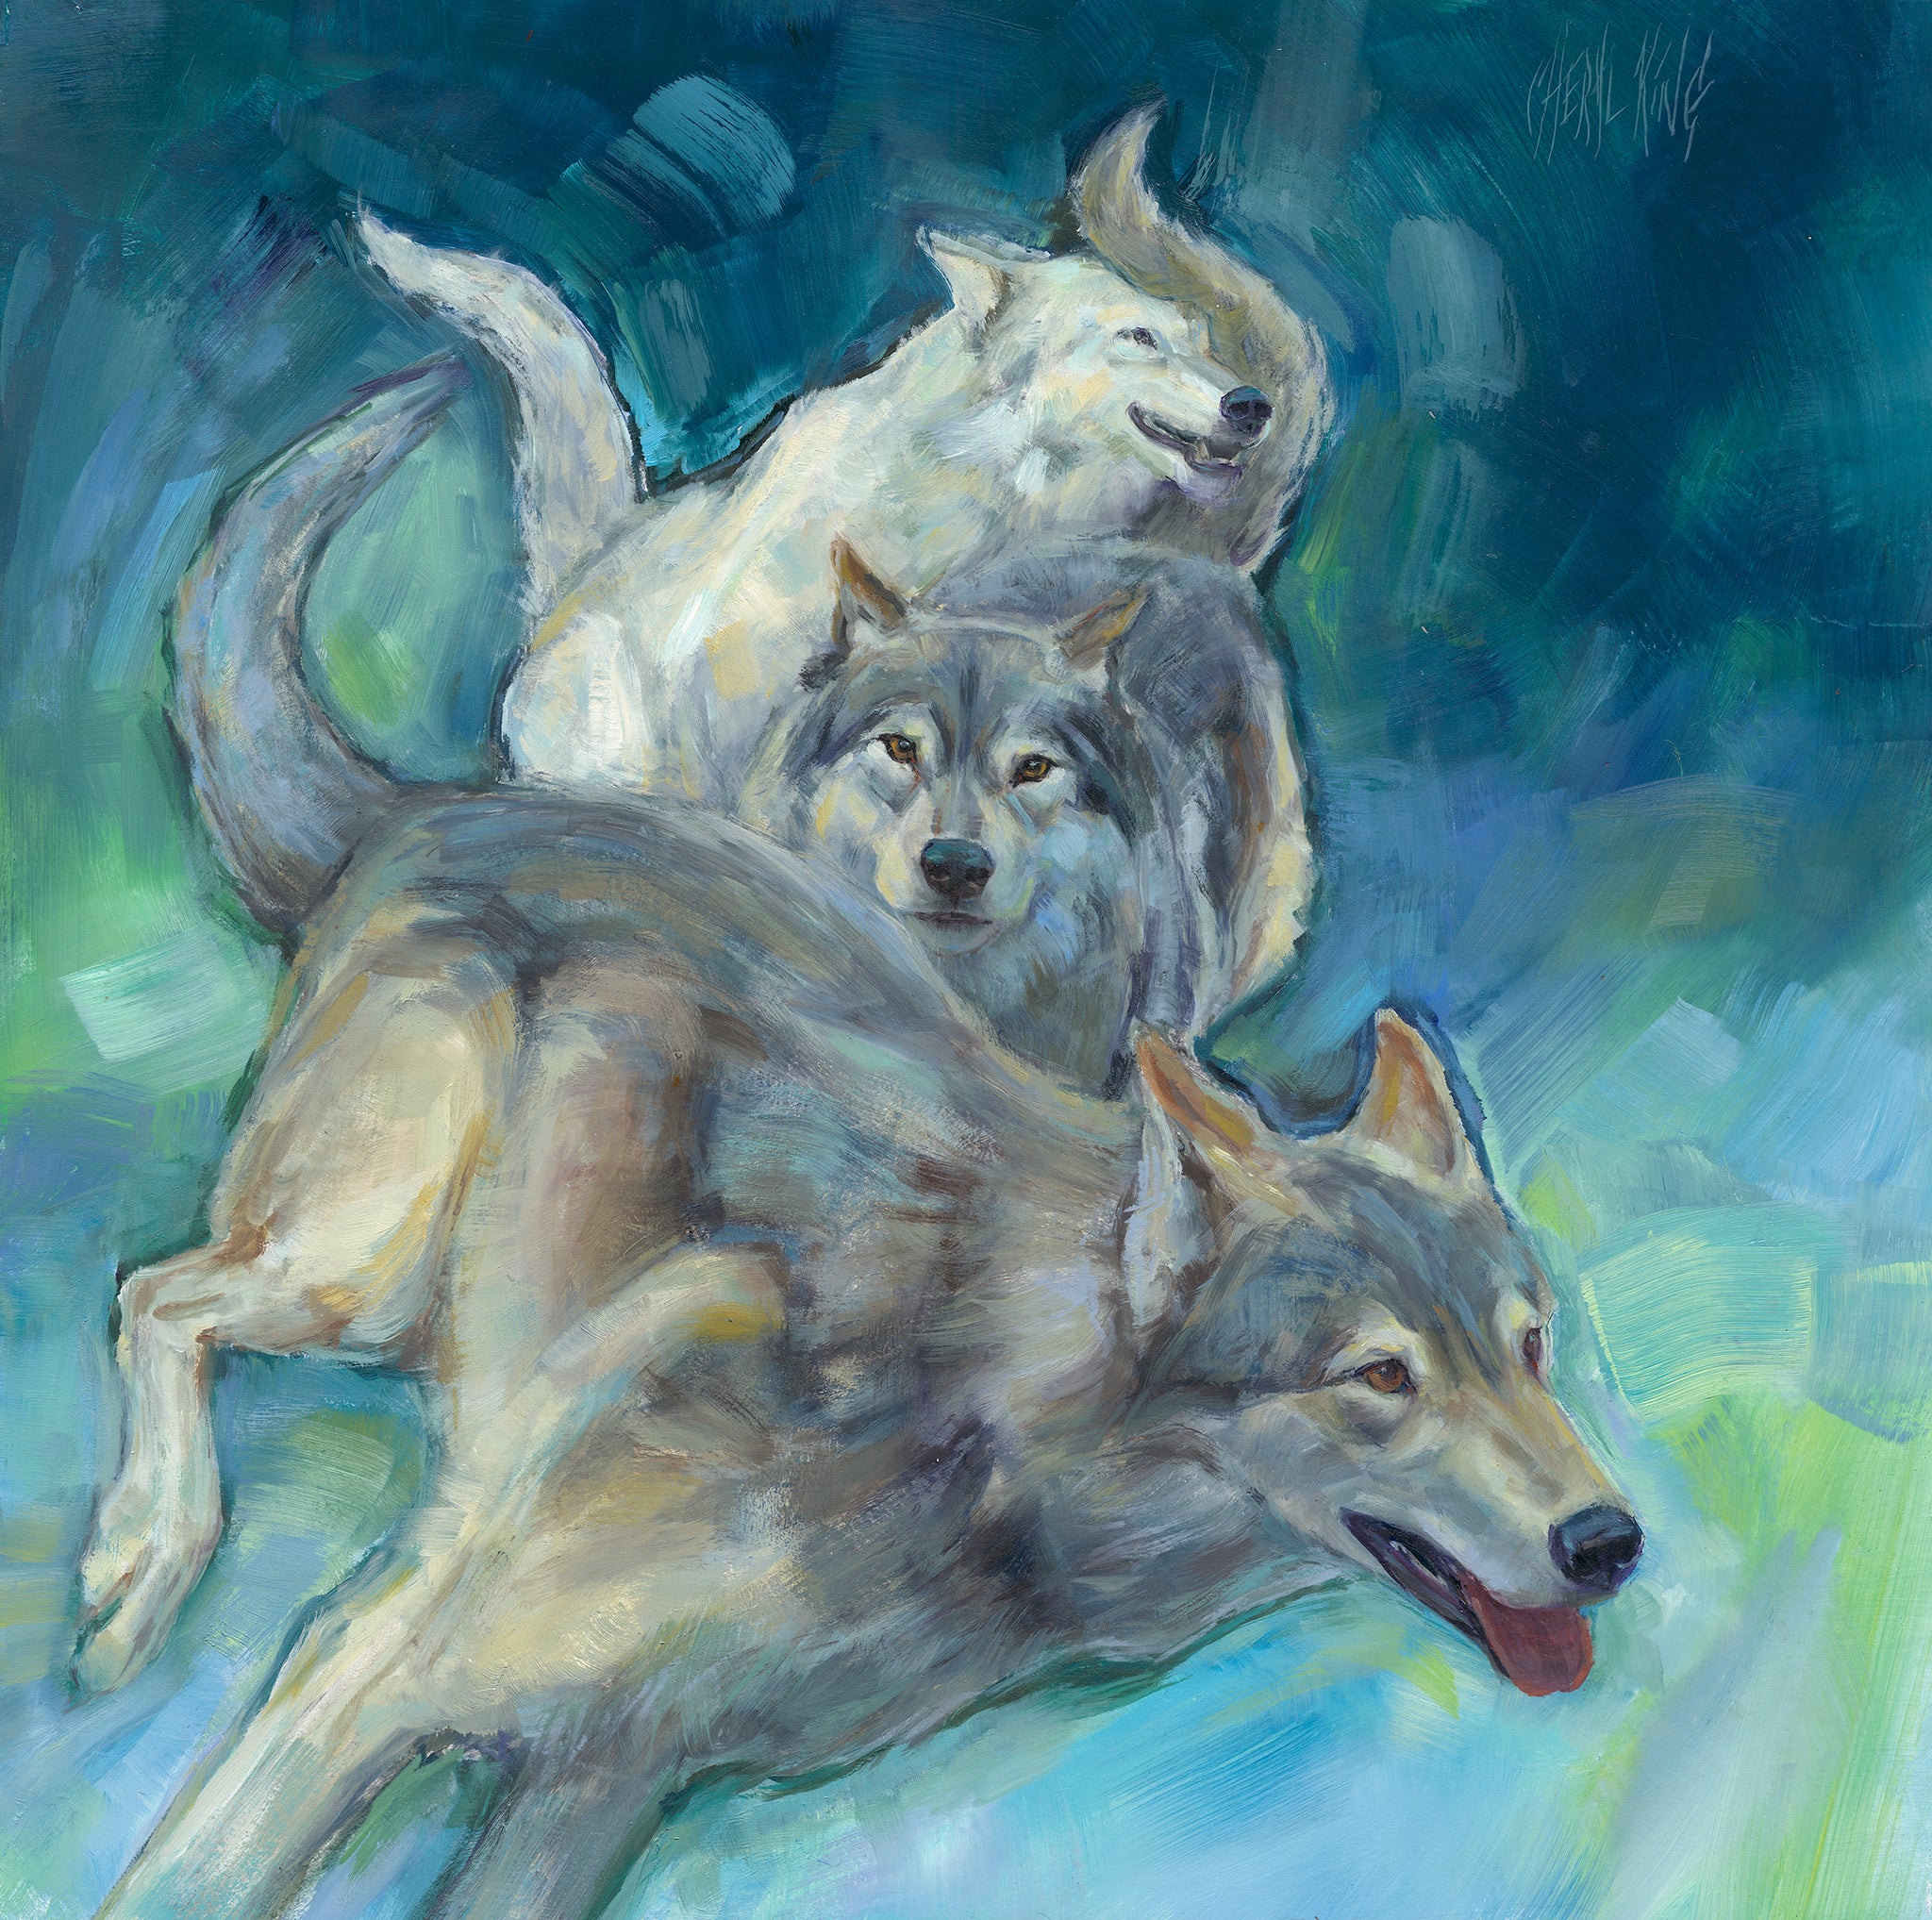 Ch-Ch-Ch-Chain of Wolves ~ 18x18 ~ SOLD